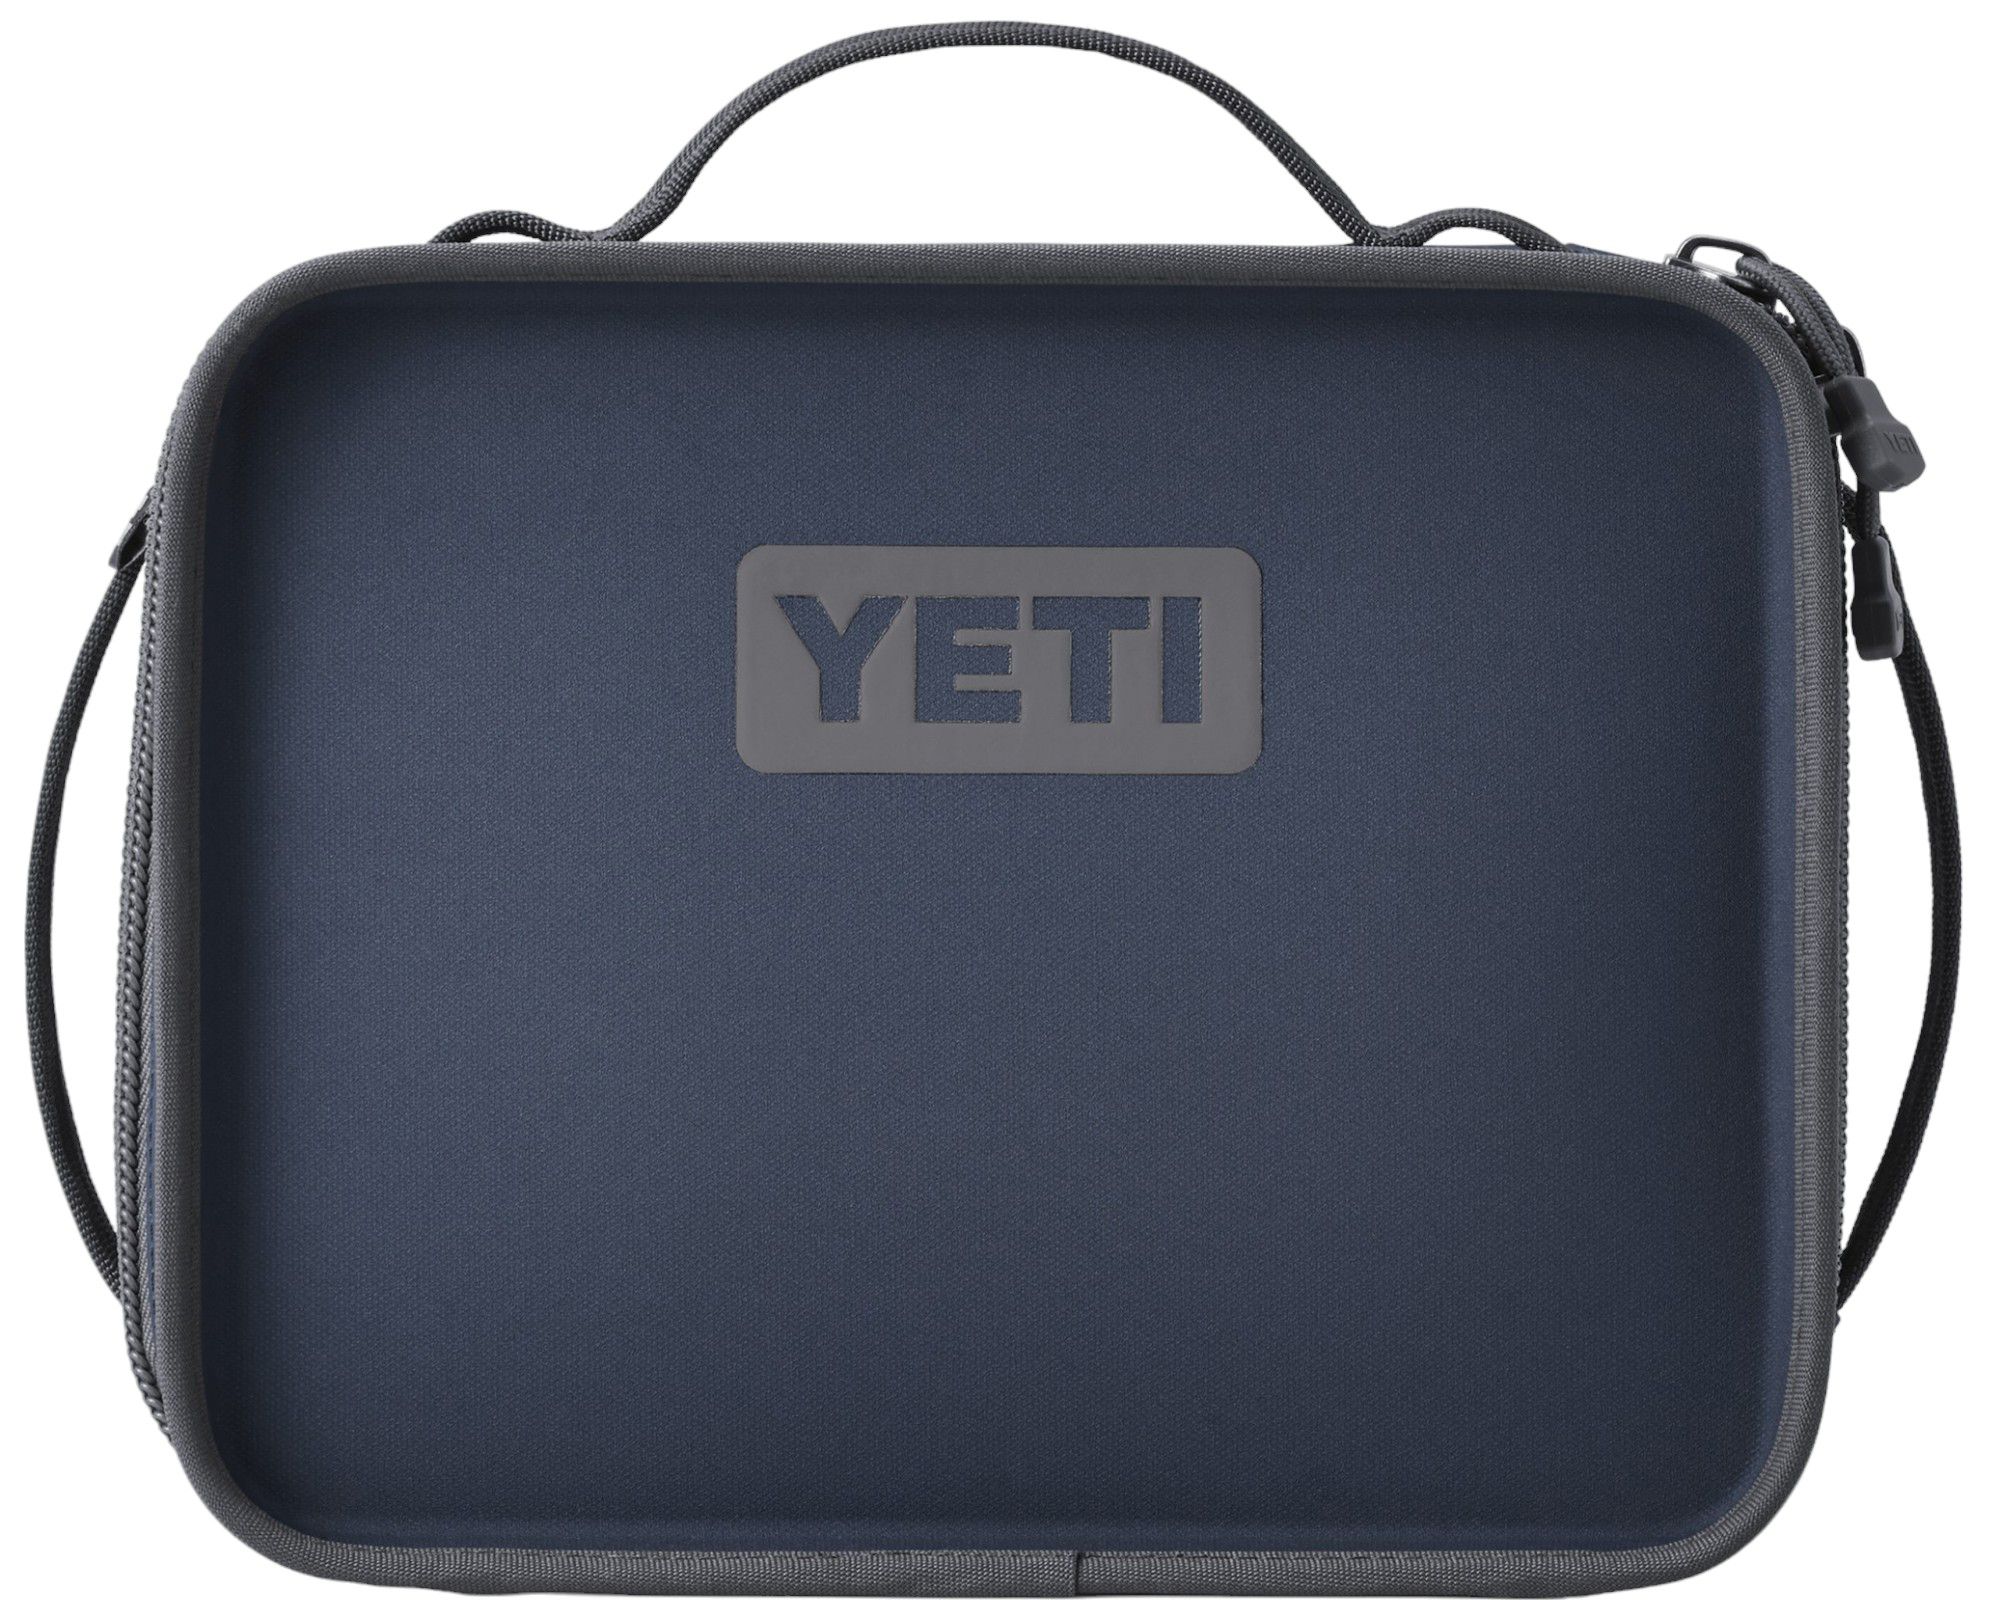 Yeti Daytrip Lunch Bag (22 stores) see the best price »